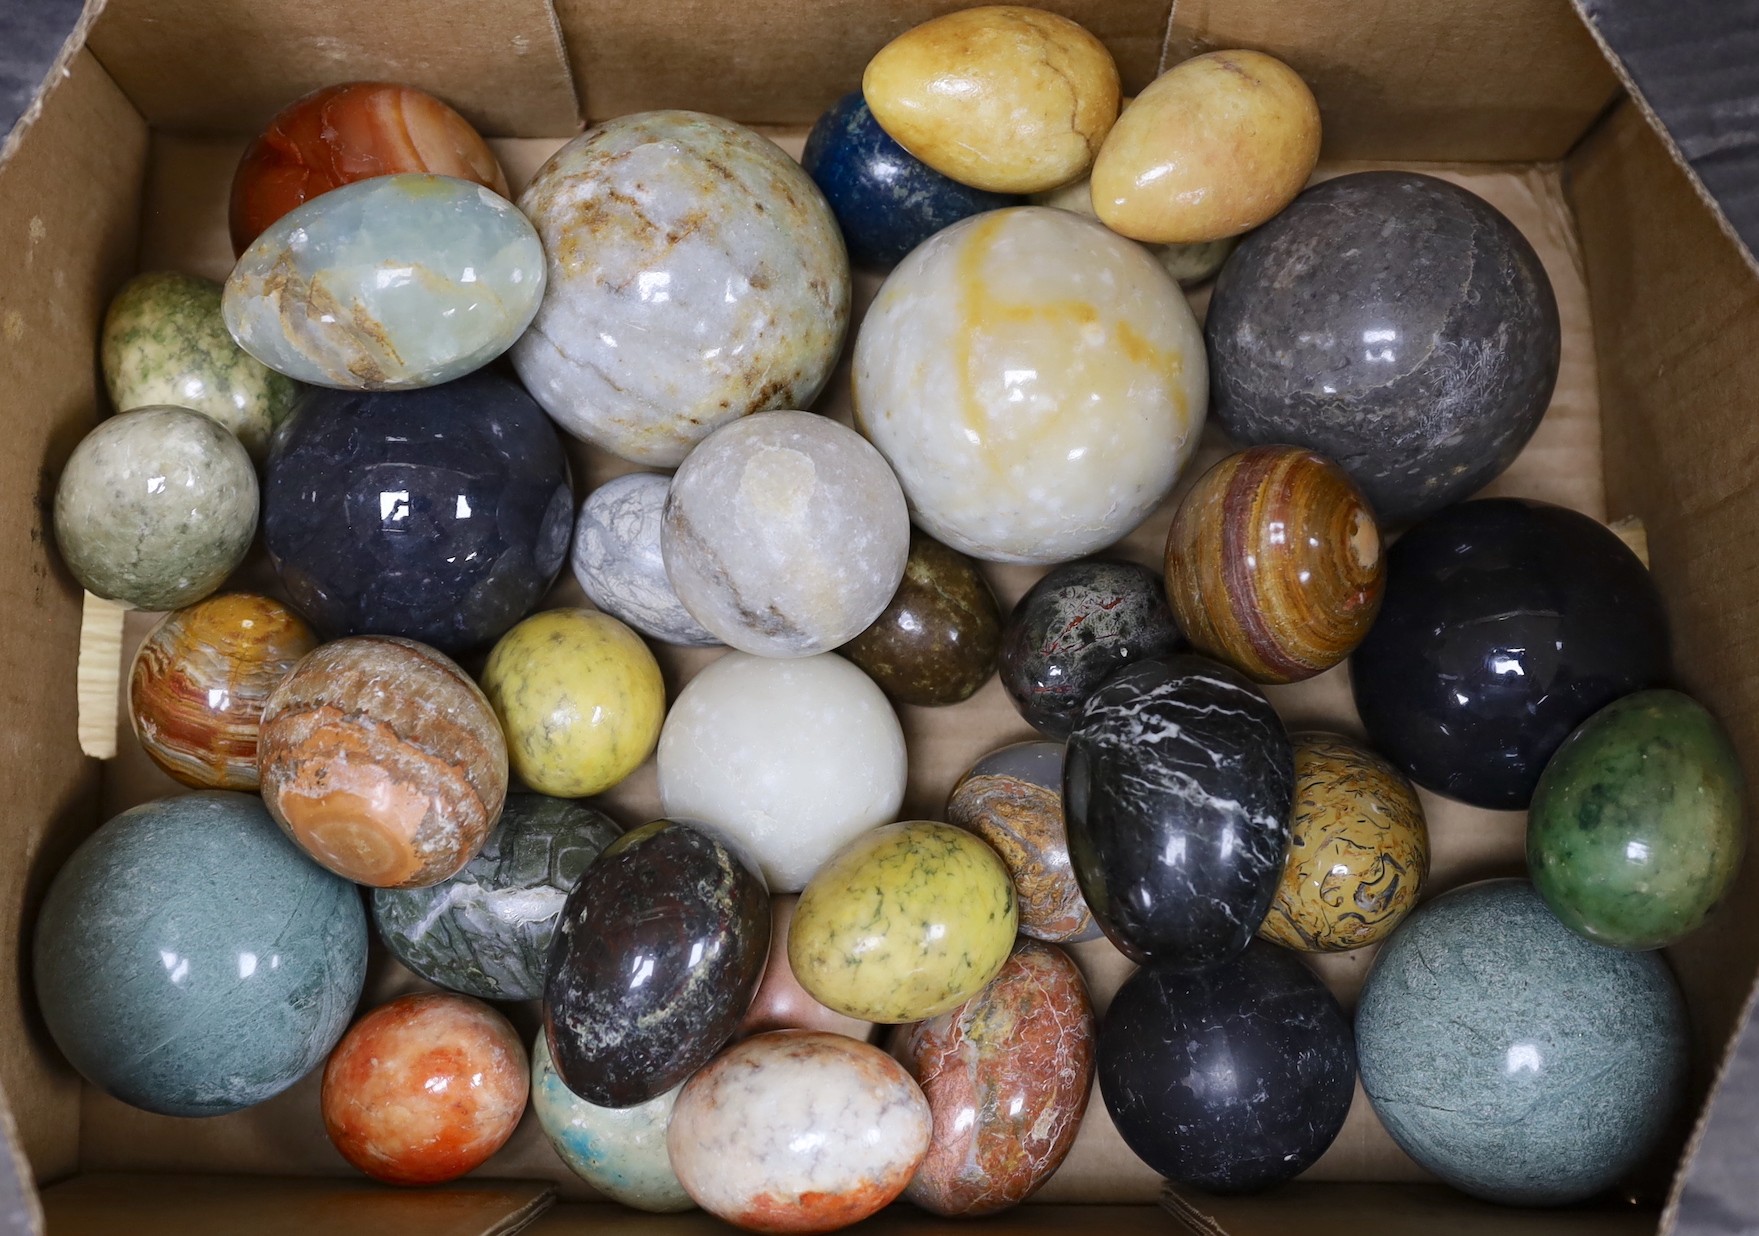 A quantity of marble eggs and balls